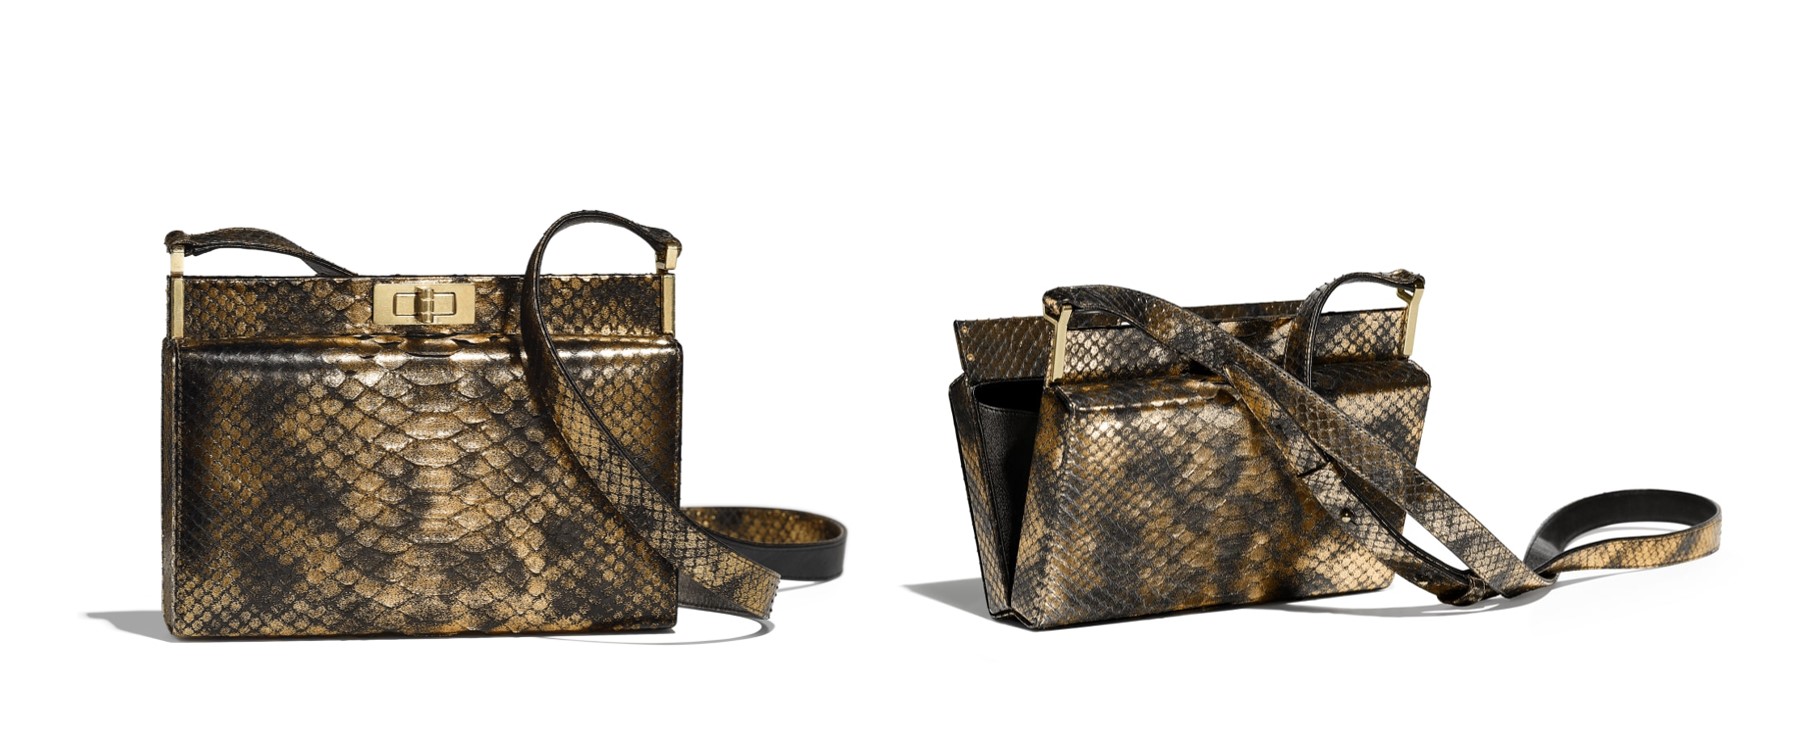 10 best Chanel bags to buy this season python skin clutch